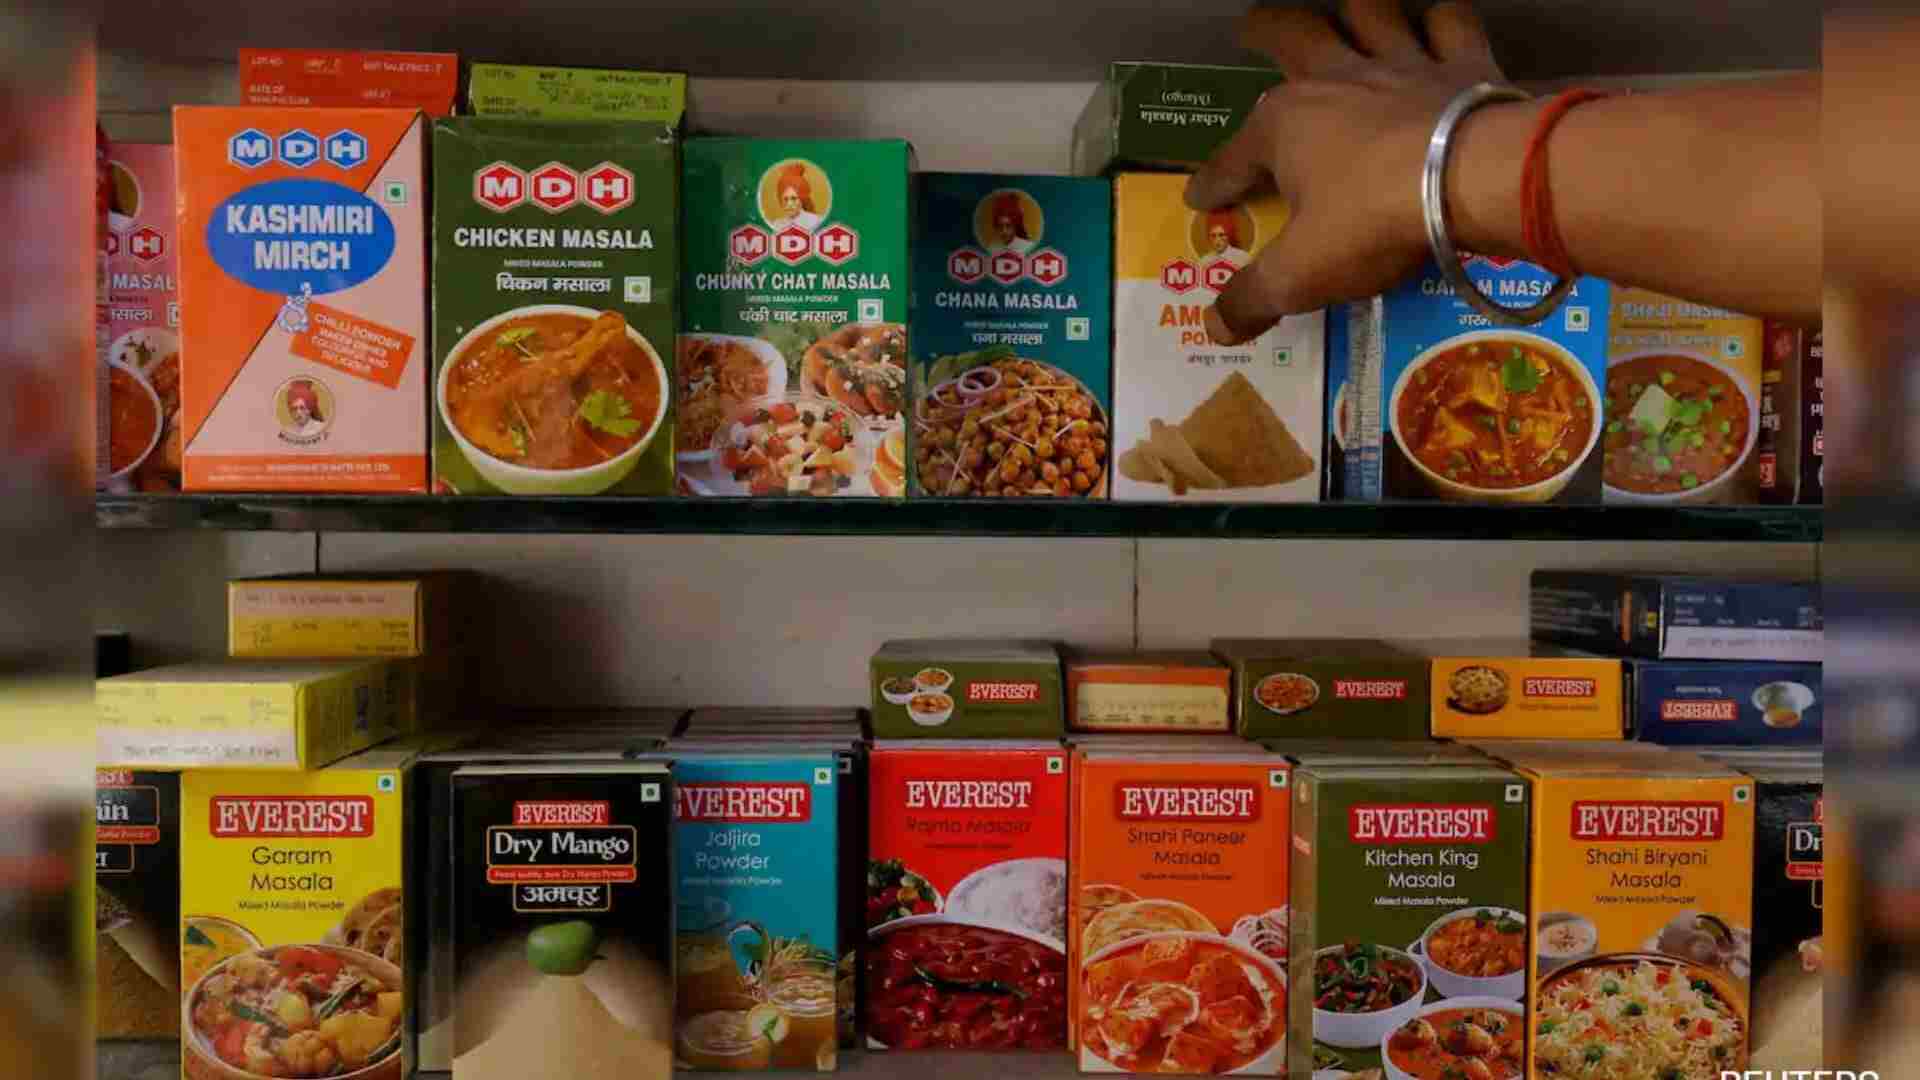 Rajasthan Food Department Finds Pesticides, Insecticides In MDH And Everest Spice Samples